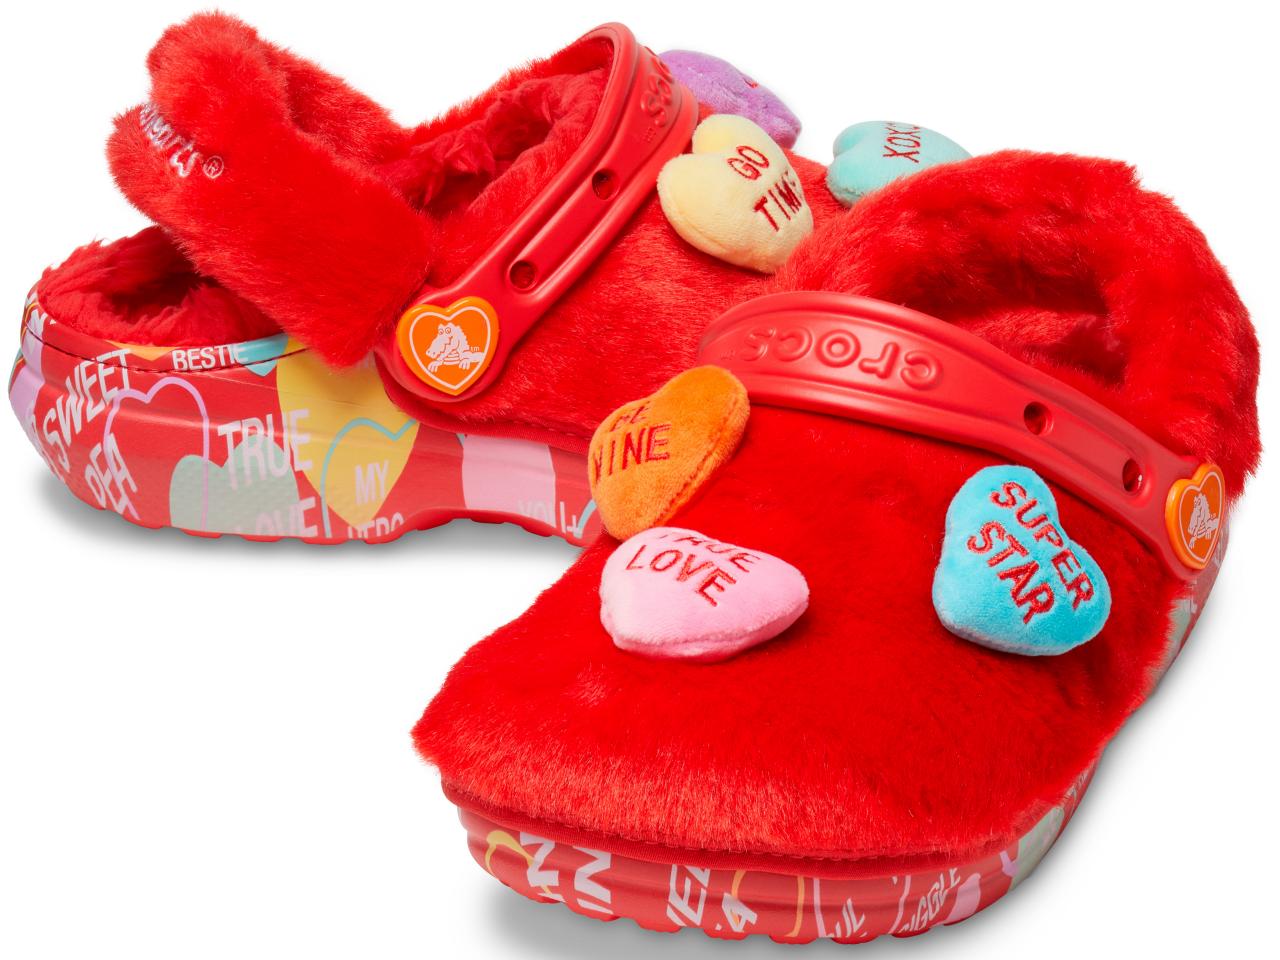 Where to Buy Sweethearts x Crocs Fur Clogs | FN Dish - Behind-the ...